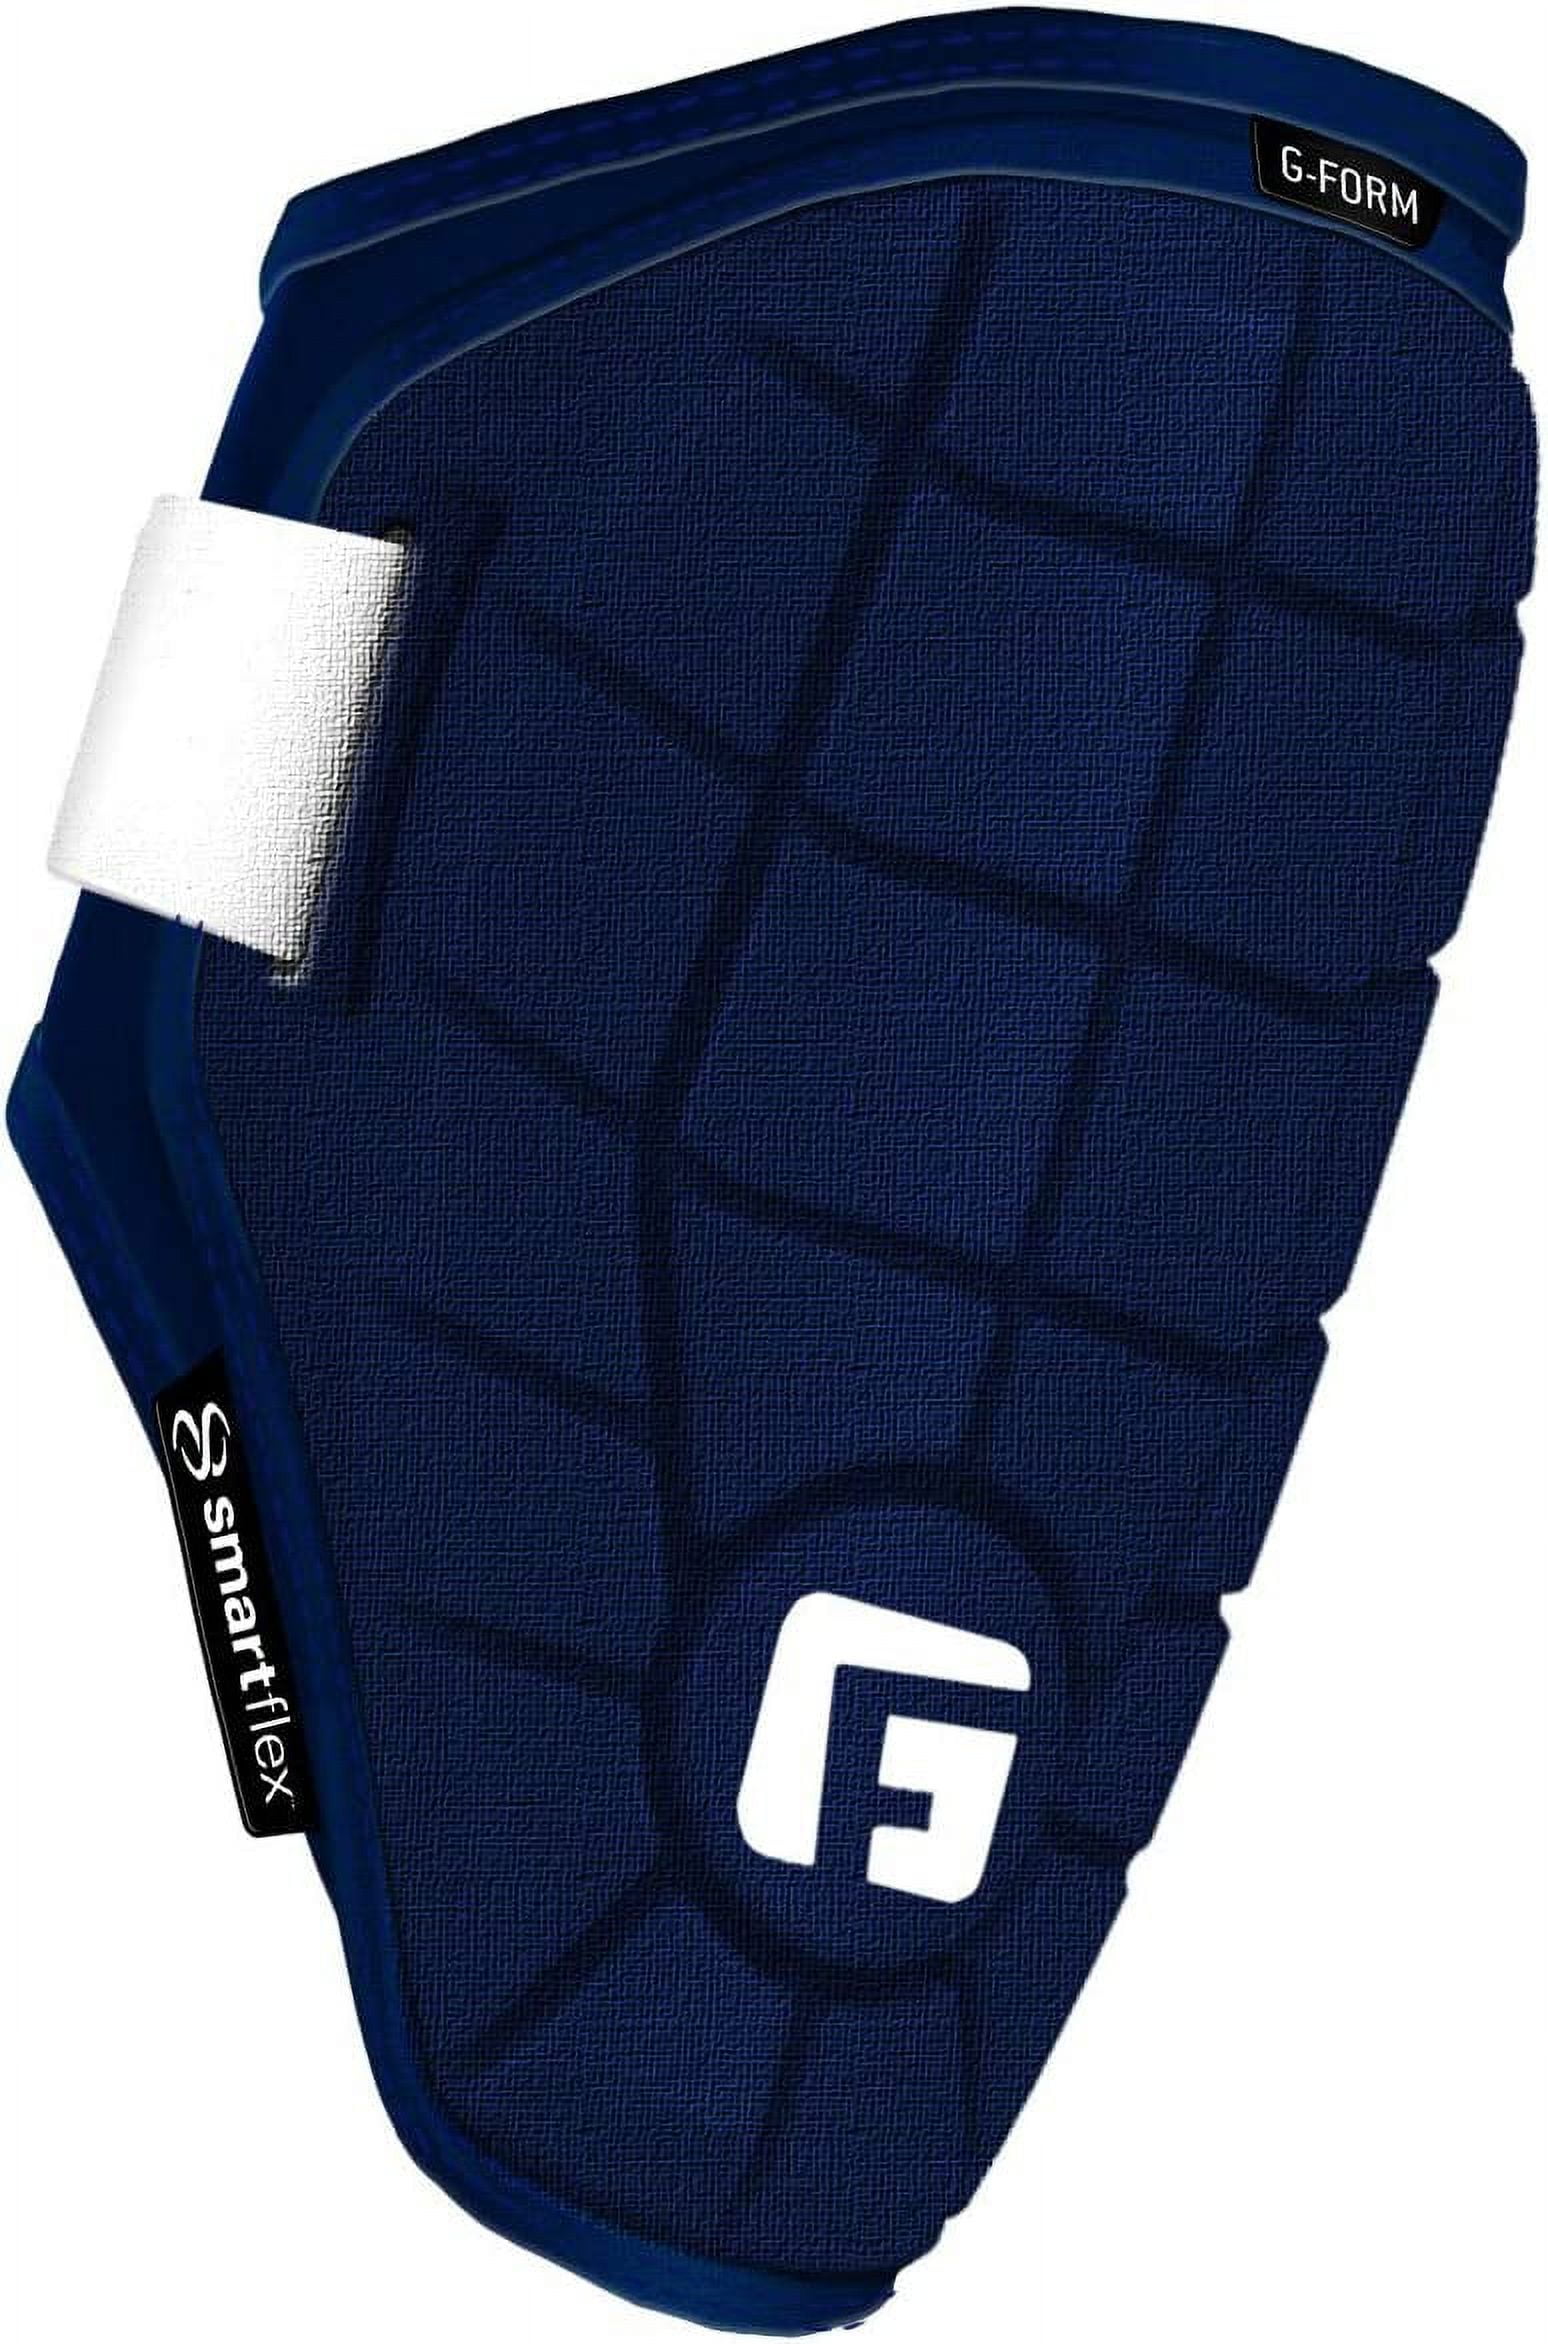 G-Form Elite Speed Batter's Baseball Elbow Guard - Elbow Pad with  Adjustable Straps - Navy, Adult S/M